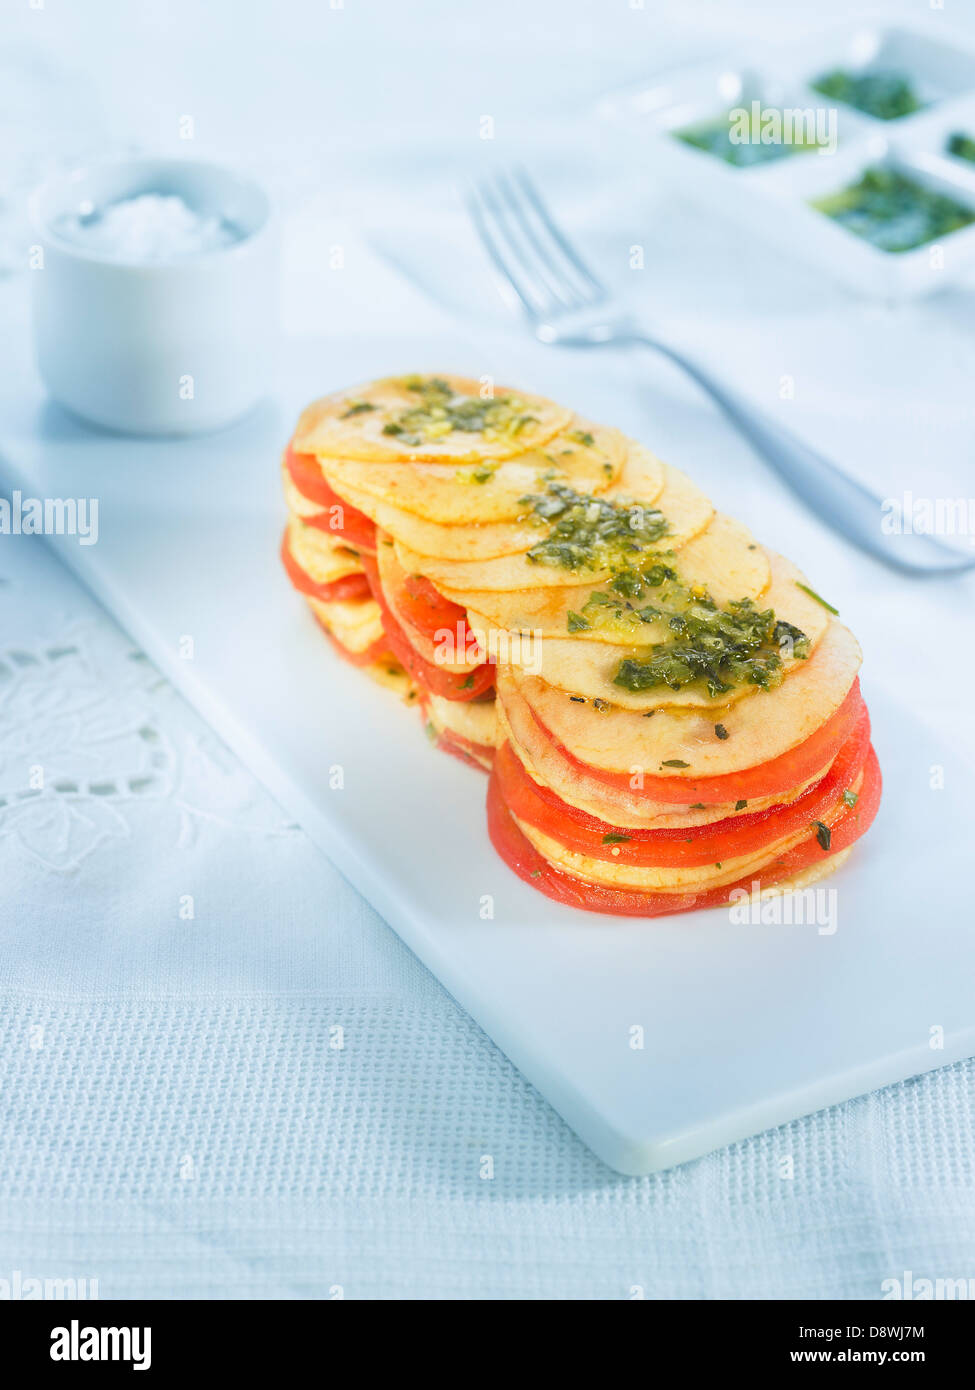 Sliced apple and tomato mille-feuille with parsley Stock Photo